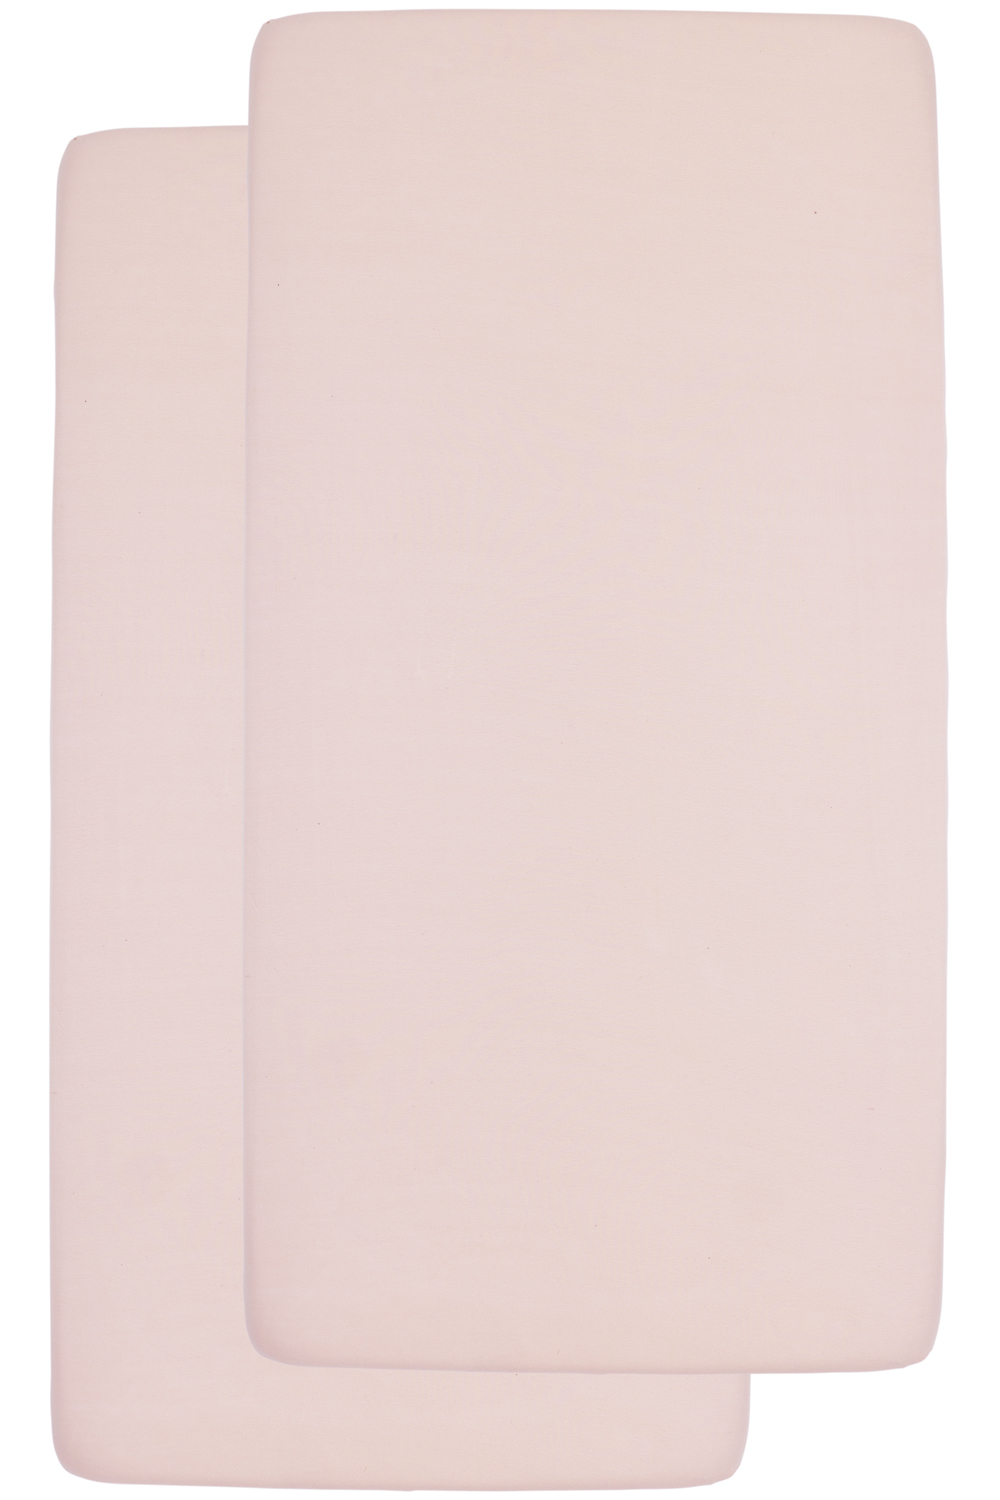 Fitted sheet cot bed 2-pack Uni - soft pink - 60x120cm